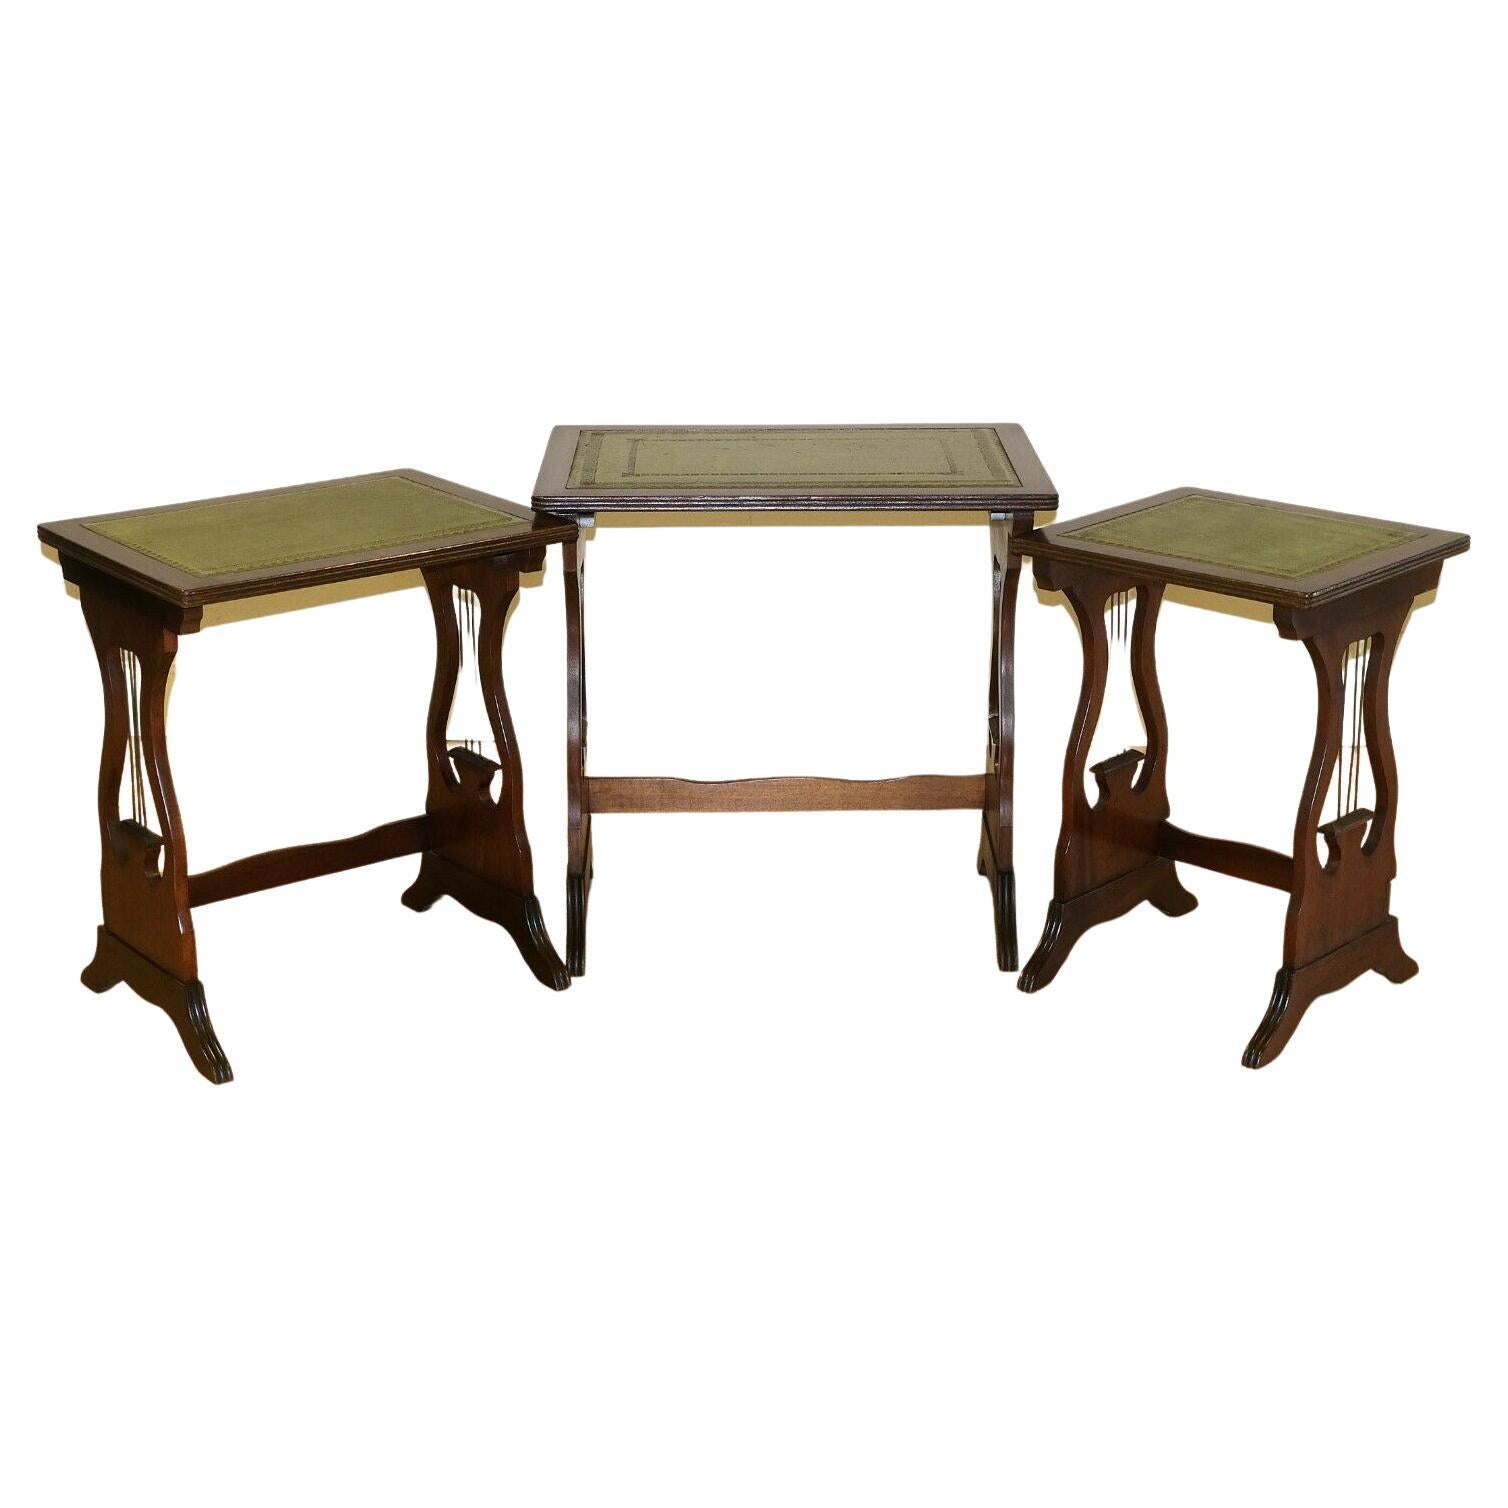 We are delighted to offer for sale these lovely Mahogany nest of tables green leather top tables. 

These good looking and well made tables are standing on elegant harp shape supports, making them very decorative and giving you amazing looks from